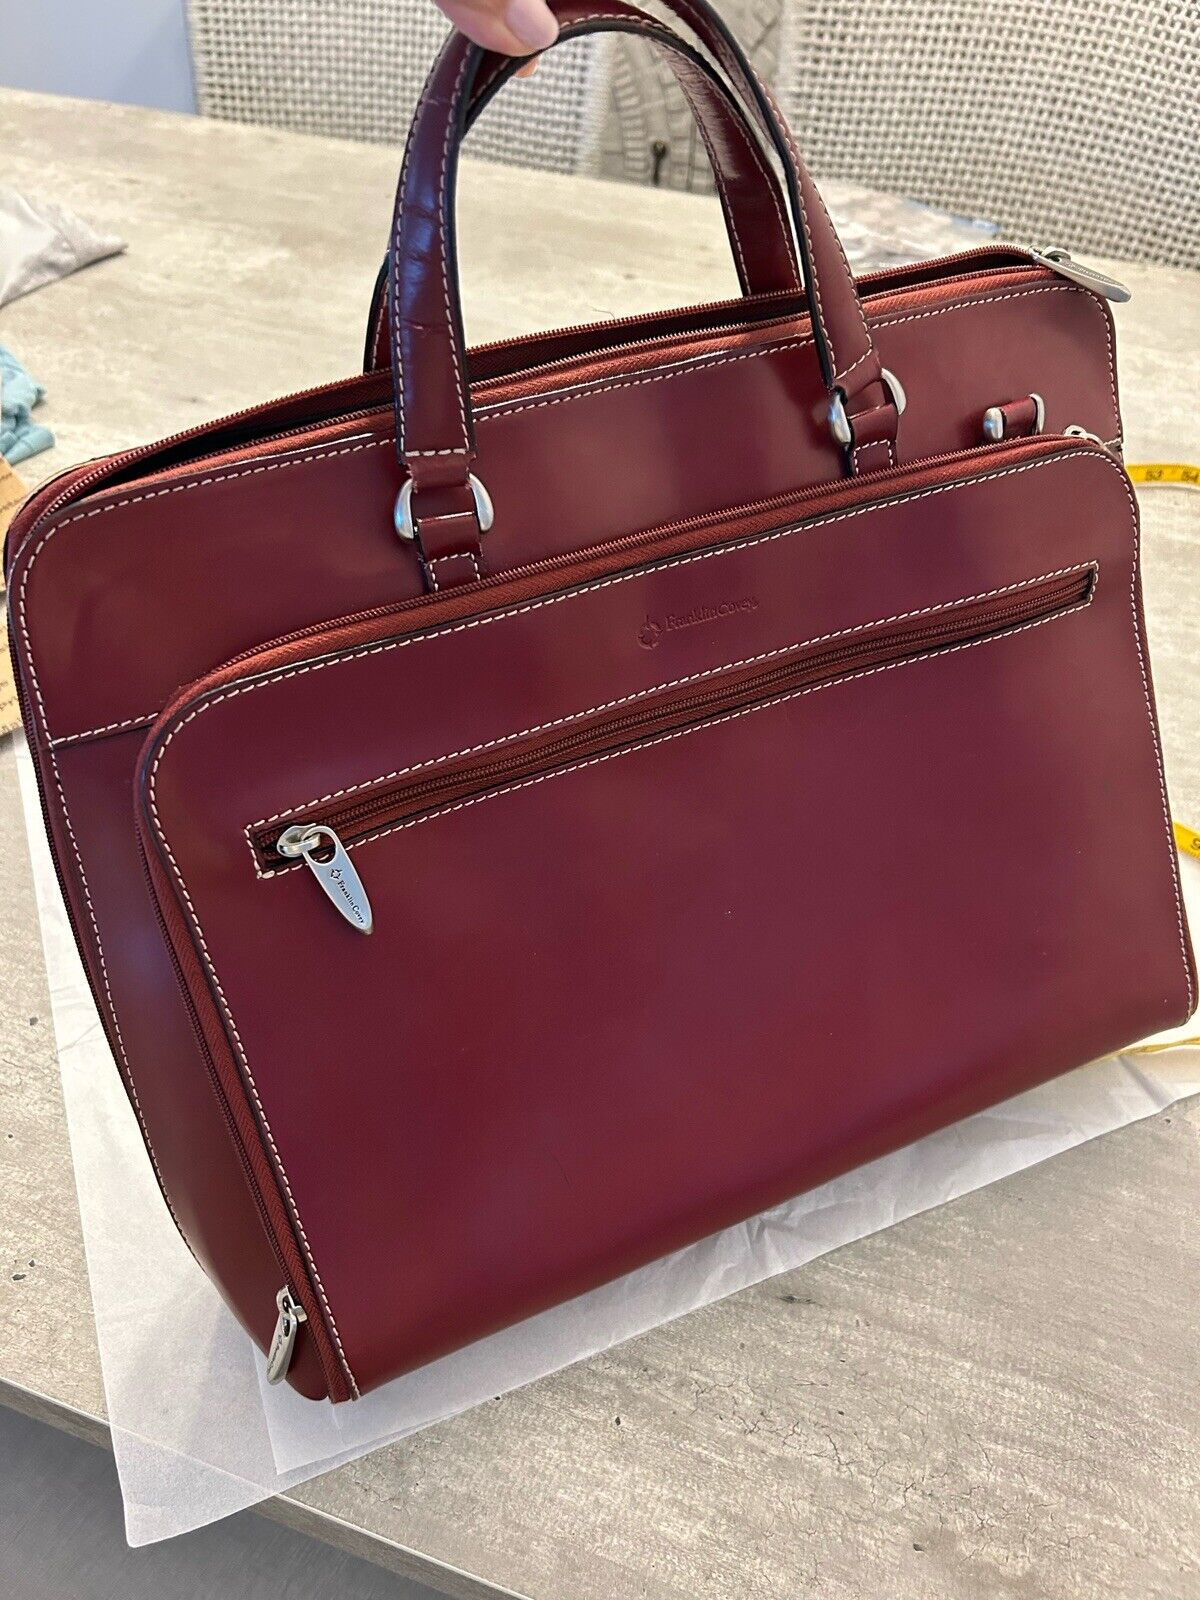 Franklin Covey Classic Briefcase Handle Bag Burgundy